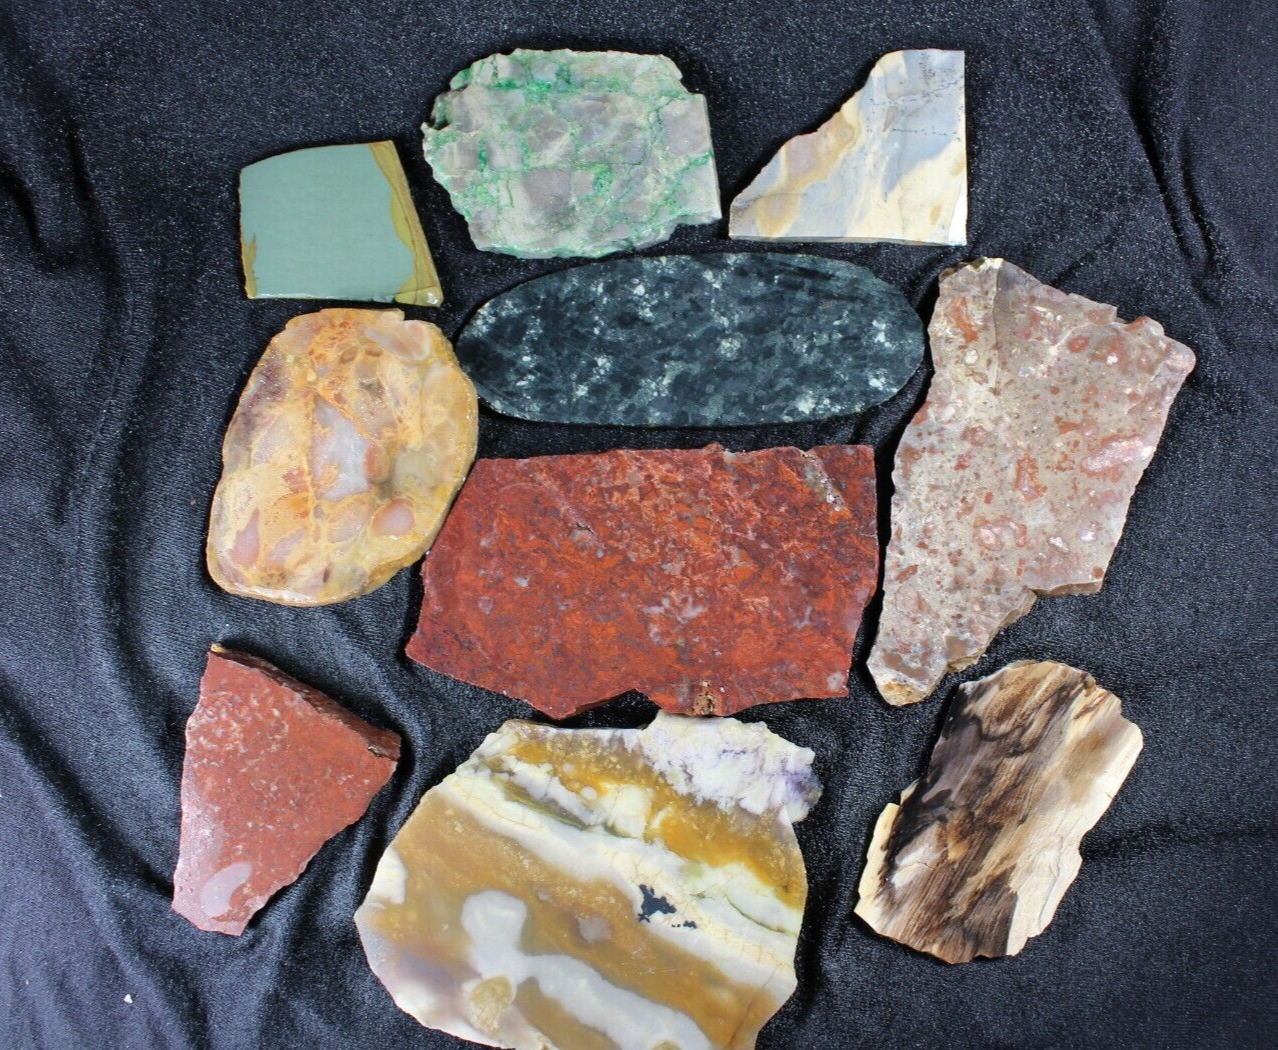 PJ: Mixed Lot of Slabs - Jasper, Agate and More   13 Ozs